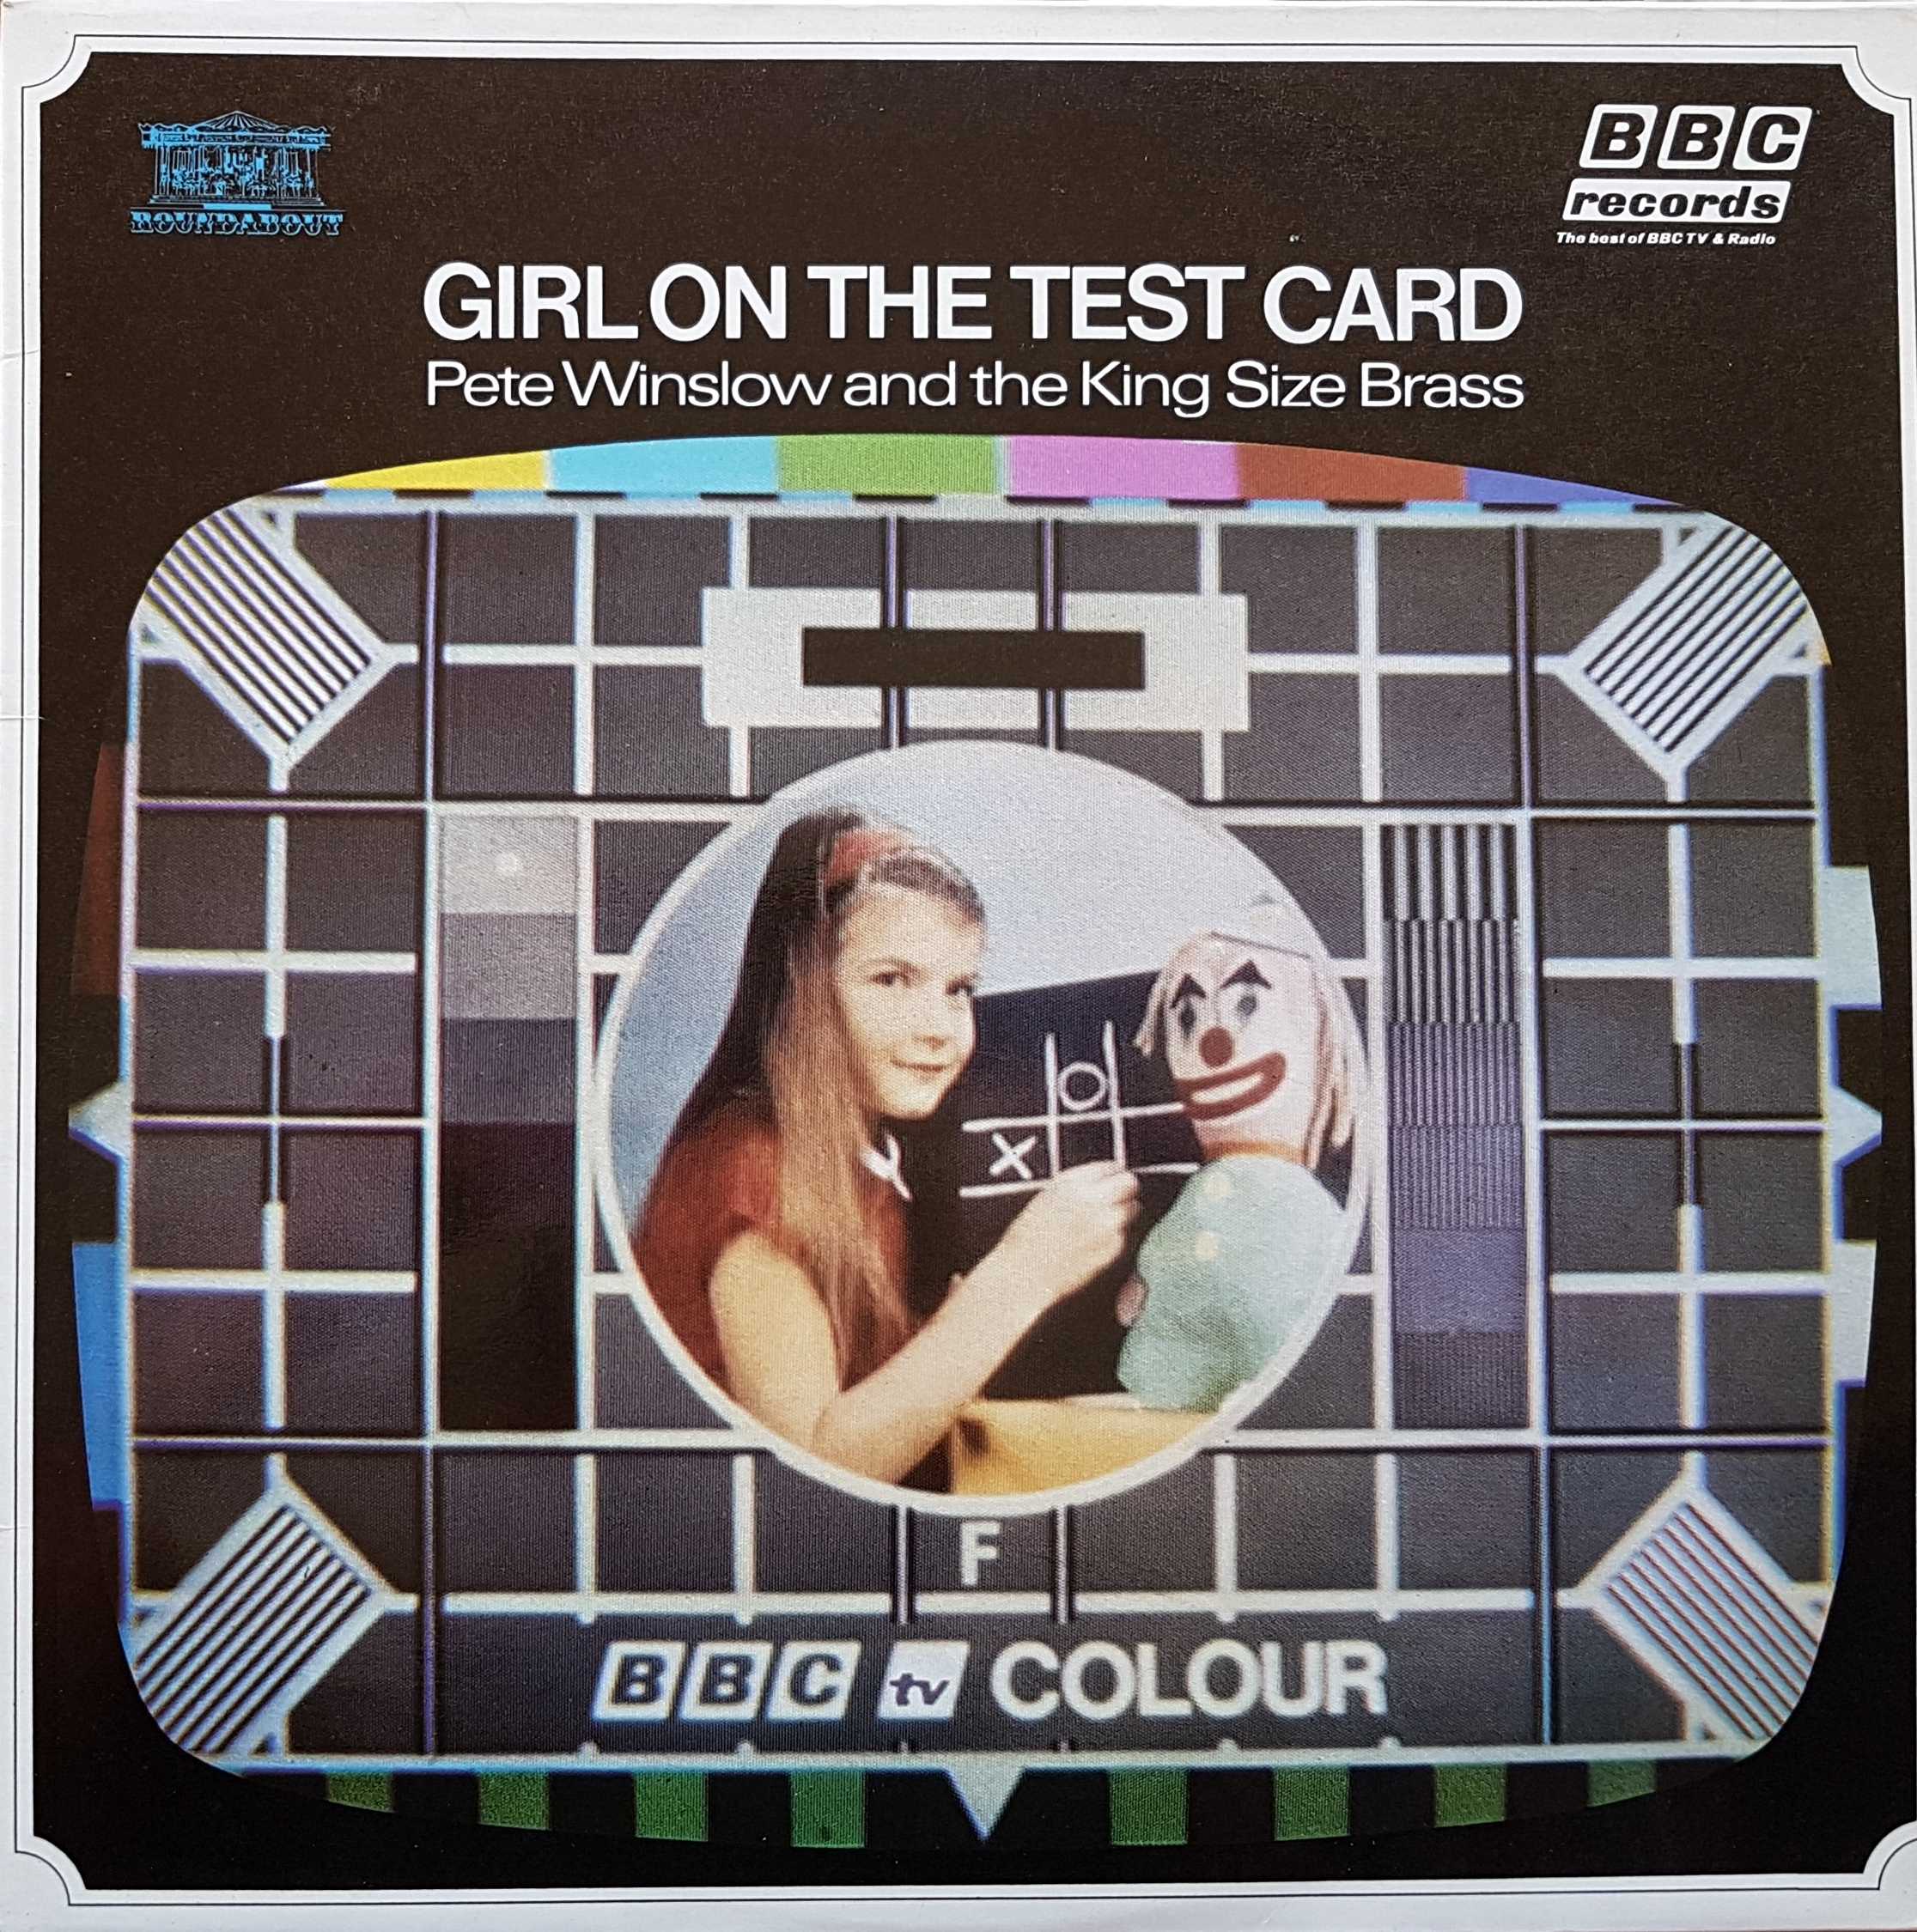 Picture of RBT 103 Girl on a testcard by artist Various from the BBC albums - Records and Tapes library